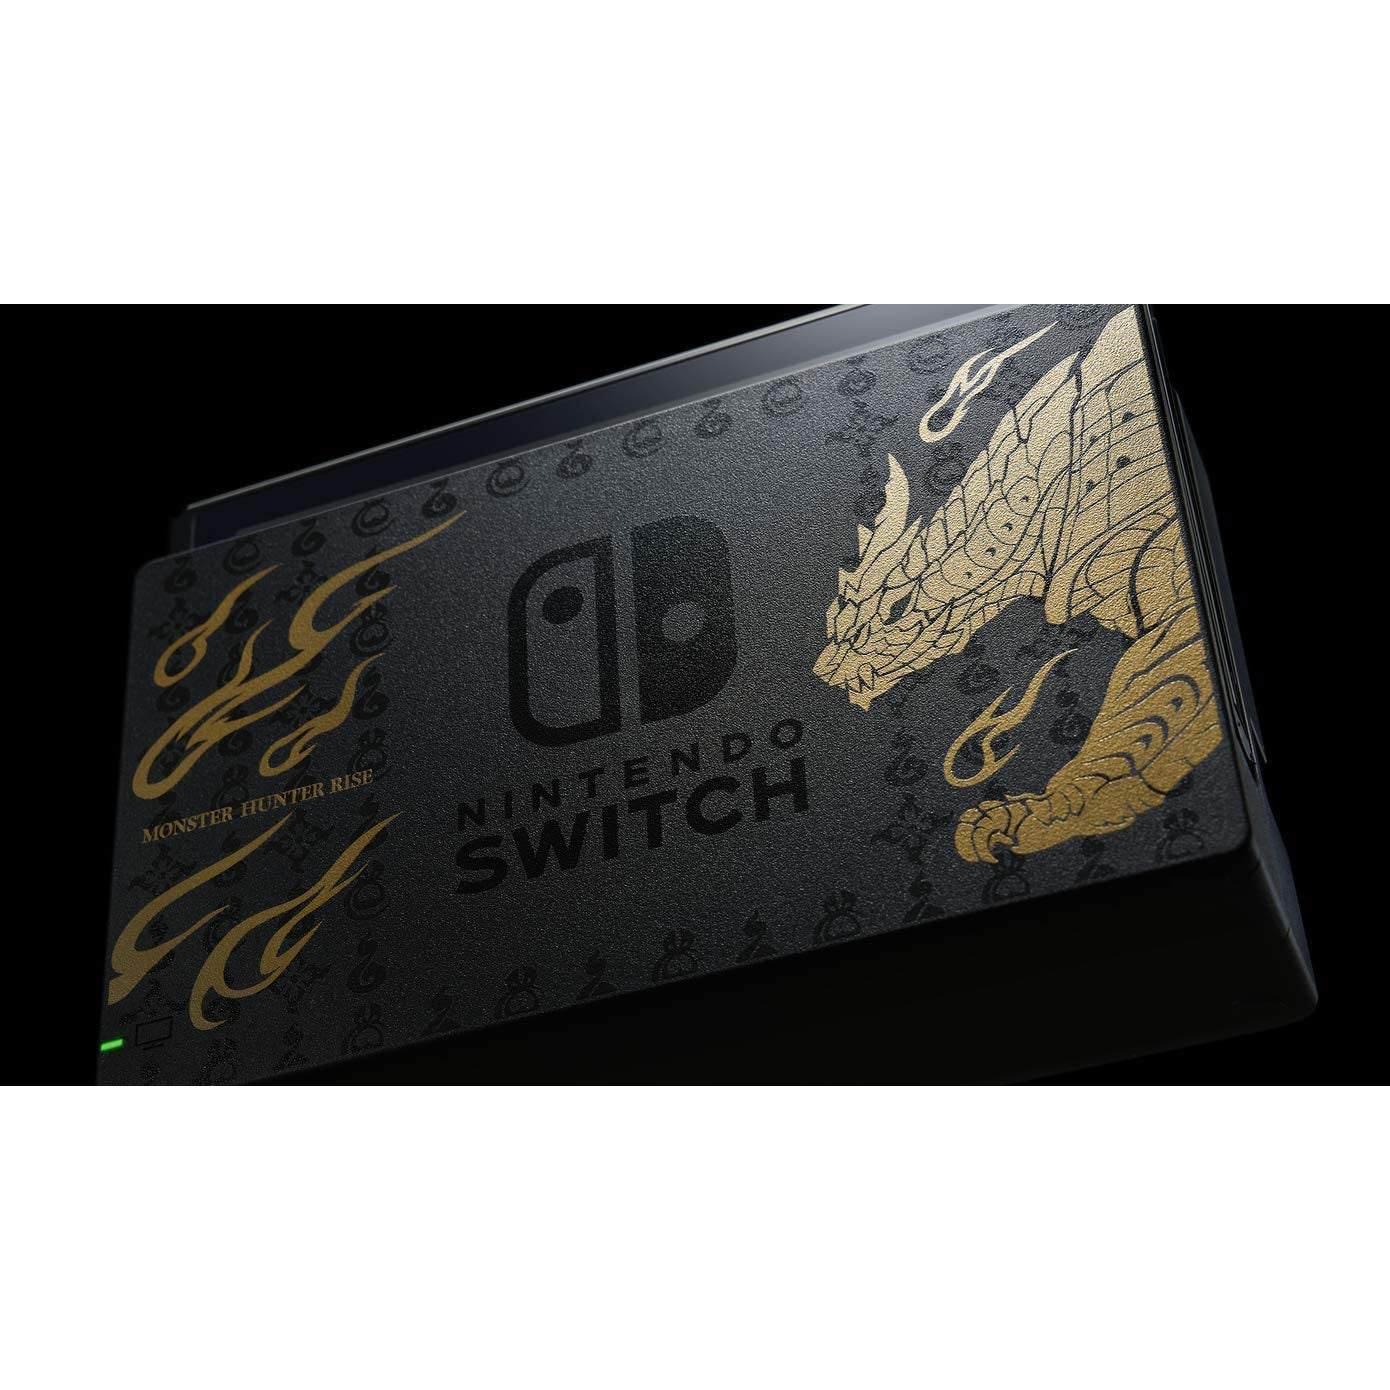 Nintendo Switch Games Console - Monster Hunter Rise Edition